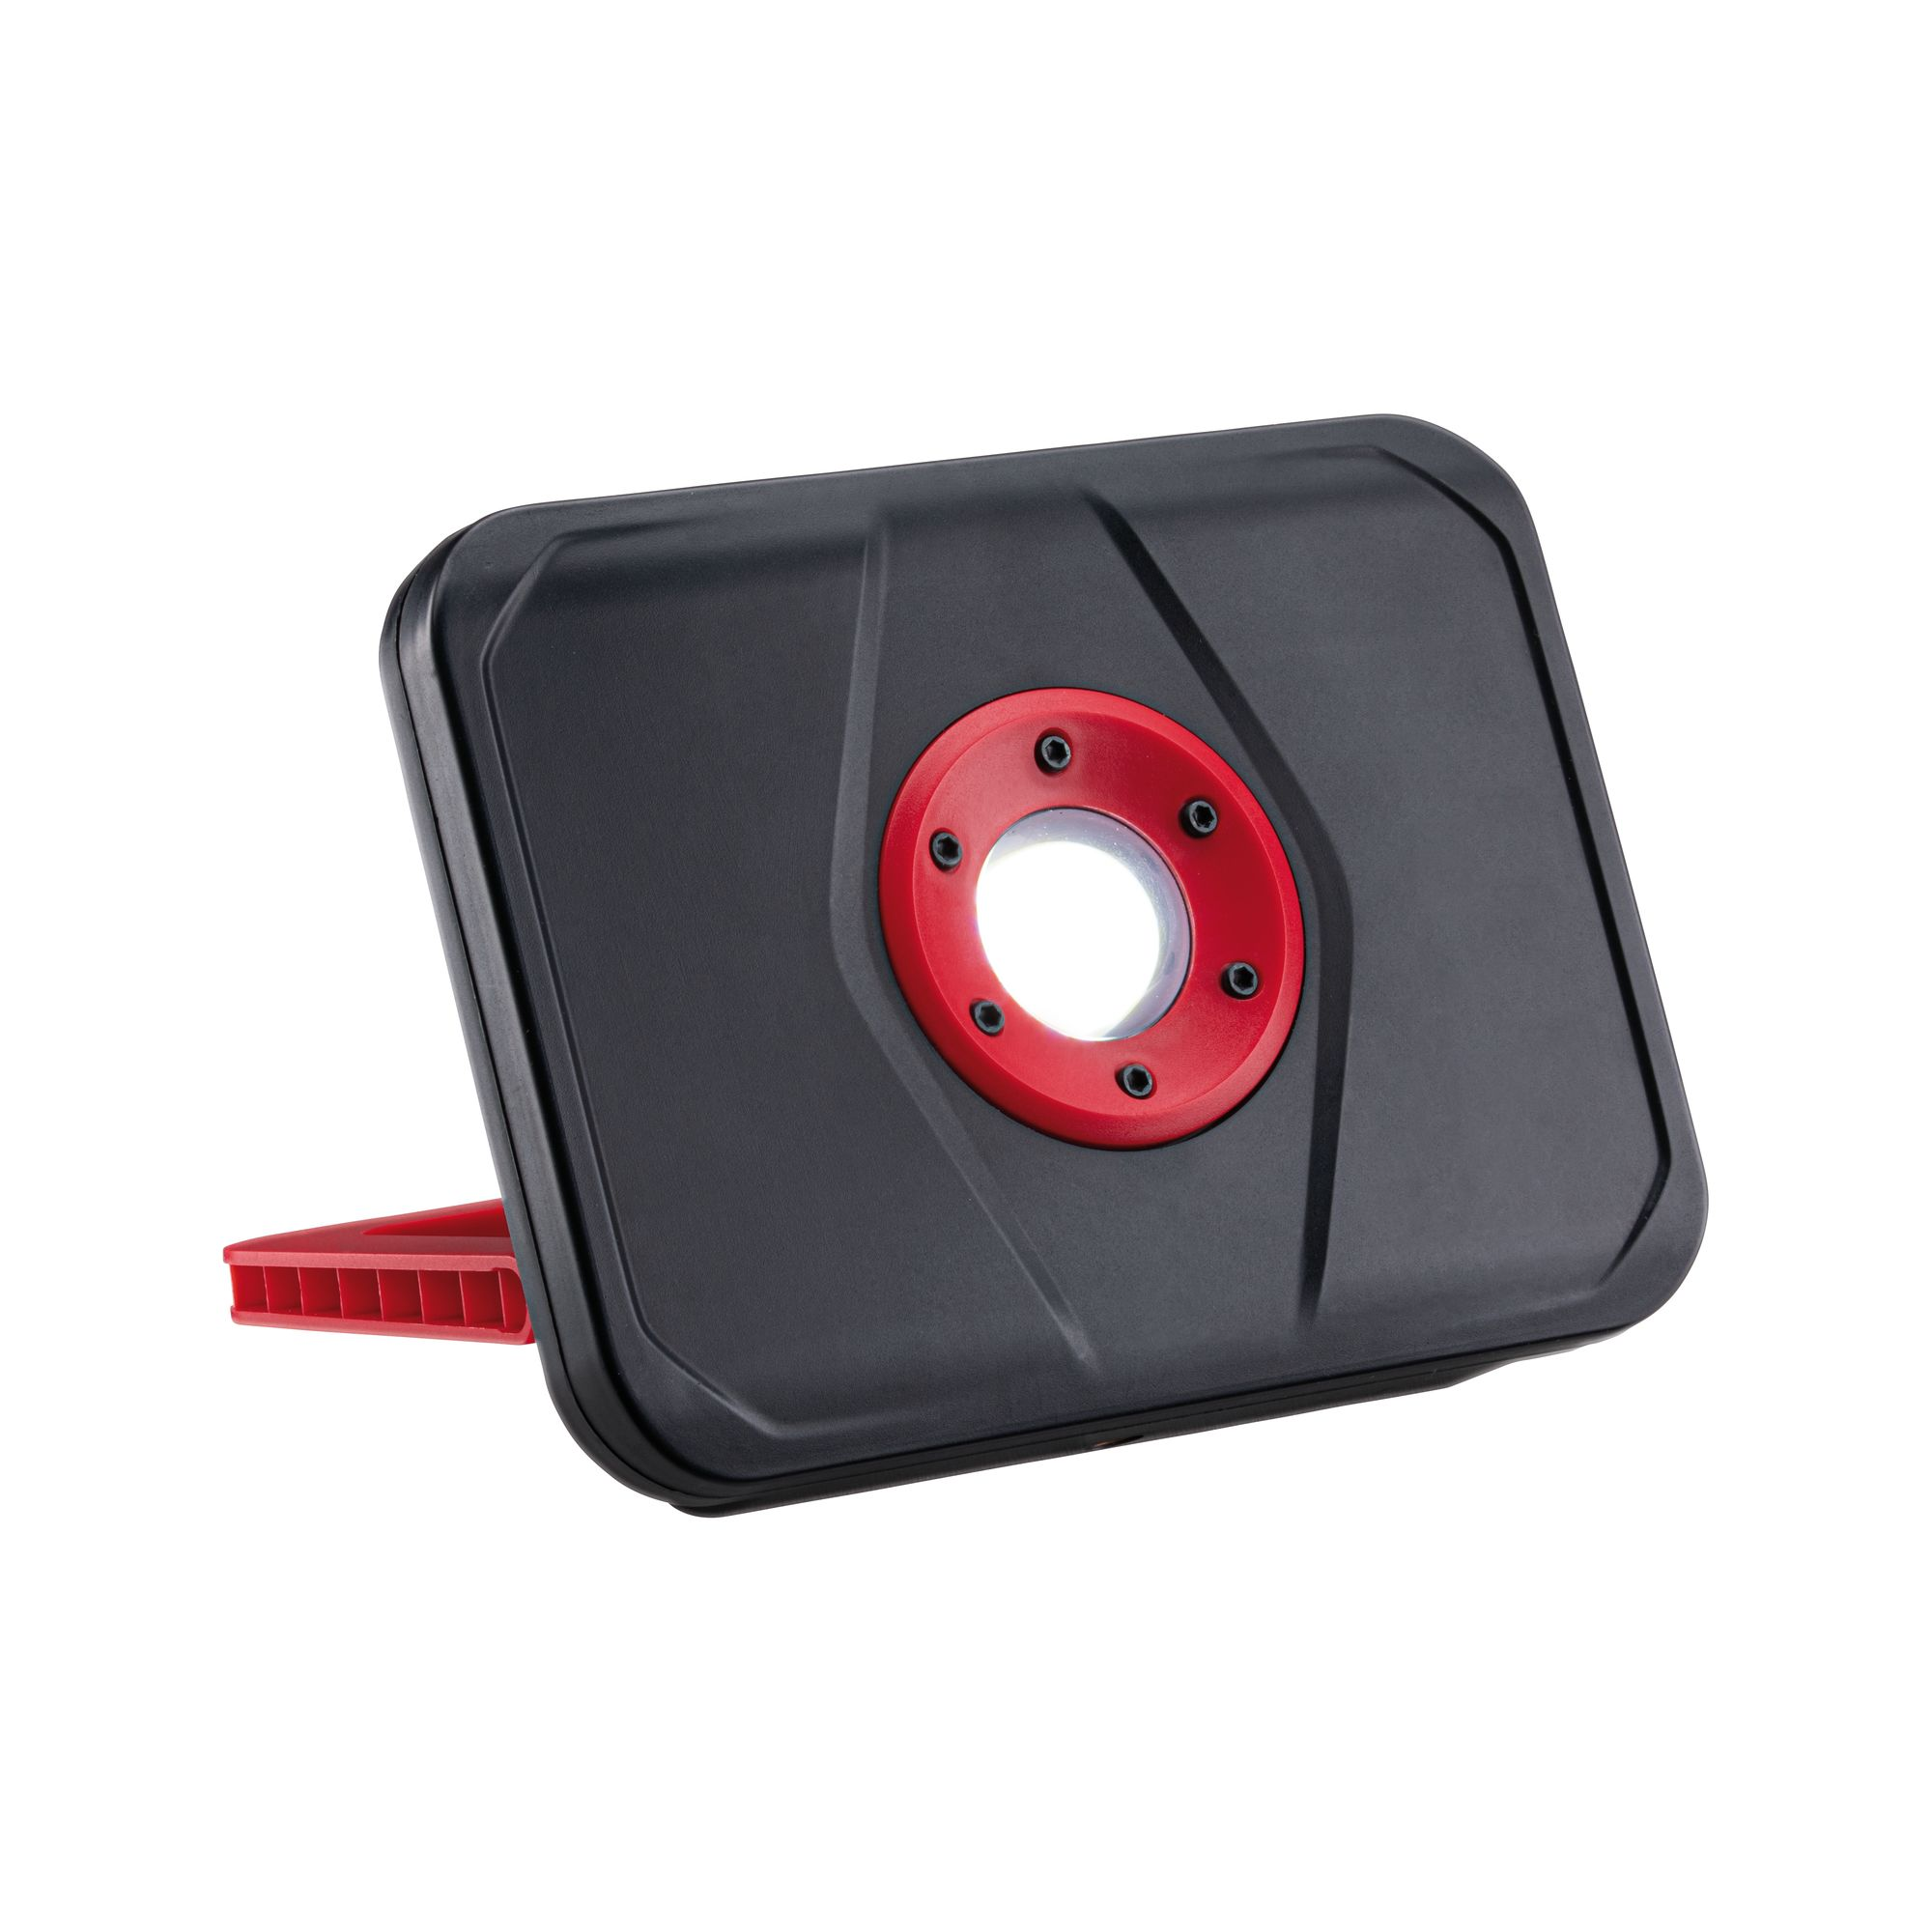 Akku-Baustrahler 'Mobile Worklight' rot/schwarz 15 W 1200 lm + product picture